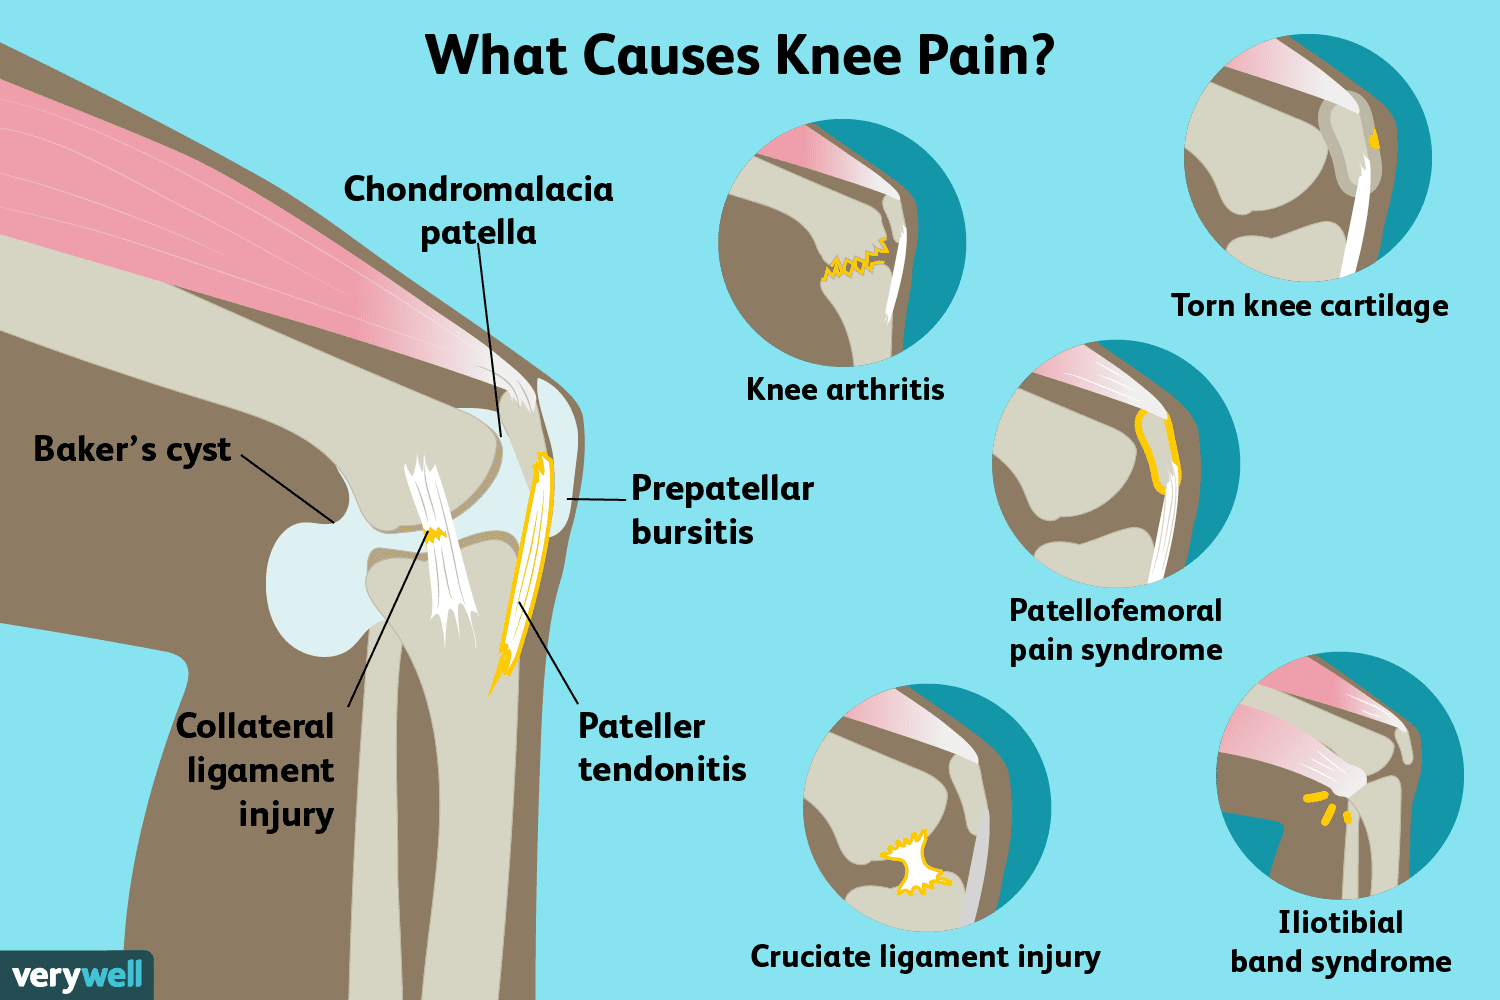 Knee Pain: Causes, Treatment, and When to See a Doctor